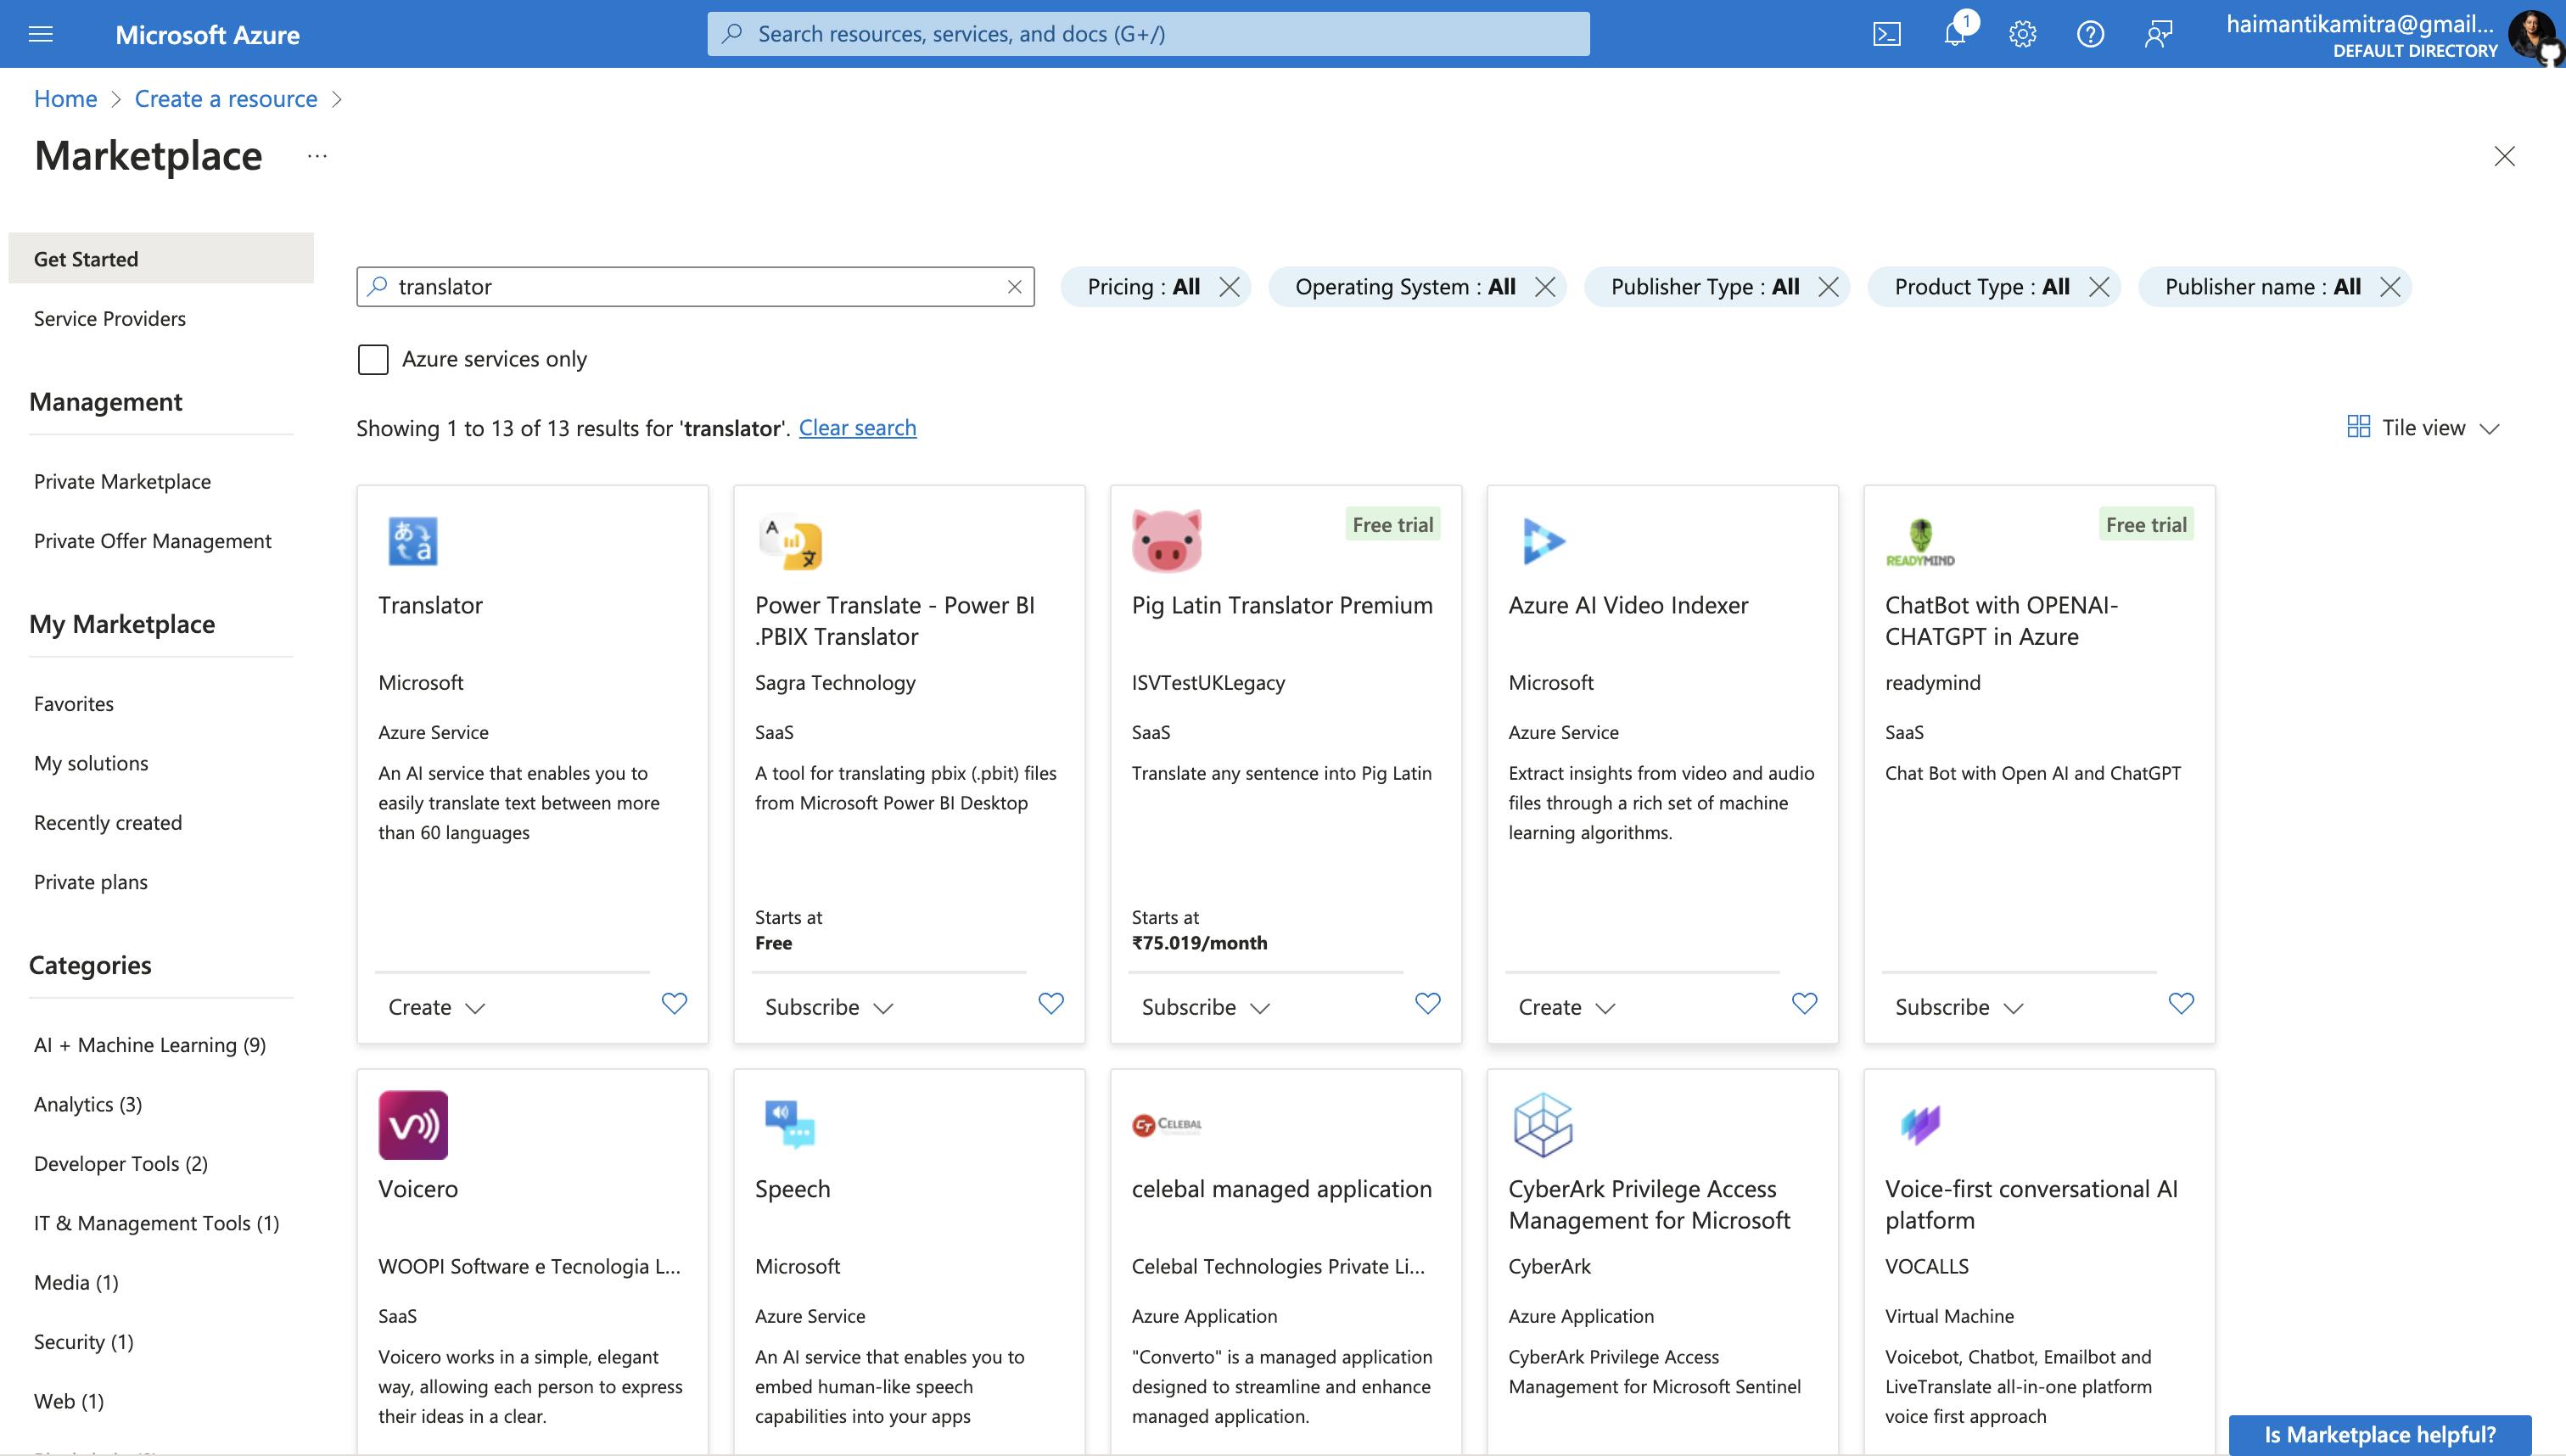 Screenshot of Microsoft Azure Marketplace showing various translator services available for subscription, including options like "Translator" by Microsoft, "Power Translate - Power BI .PBIX Translator" by Saga Technology, and "Pig Latin Translator Premium" by ISVTestUKLegacy.